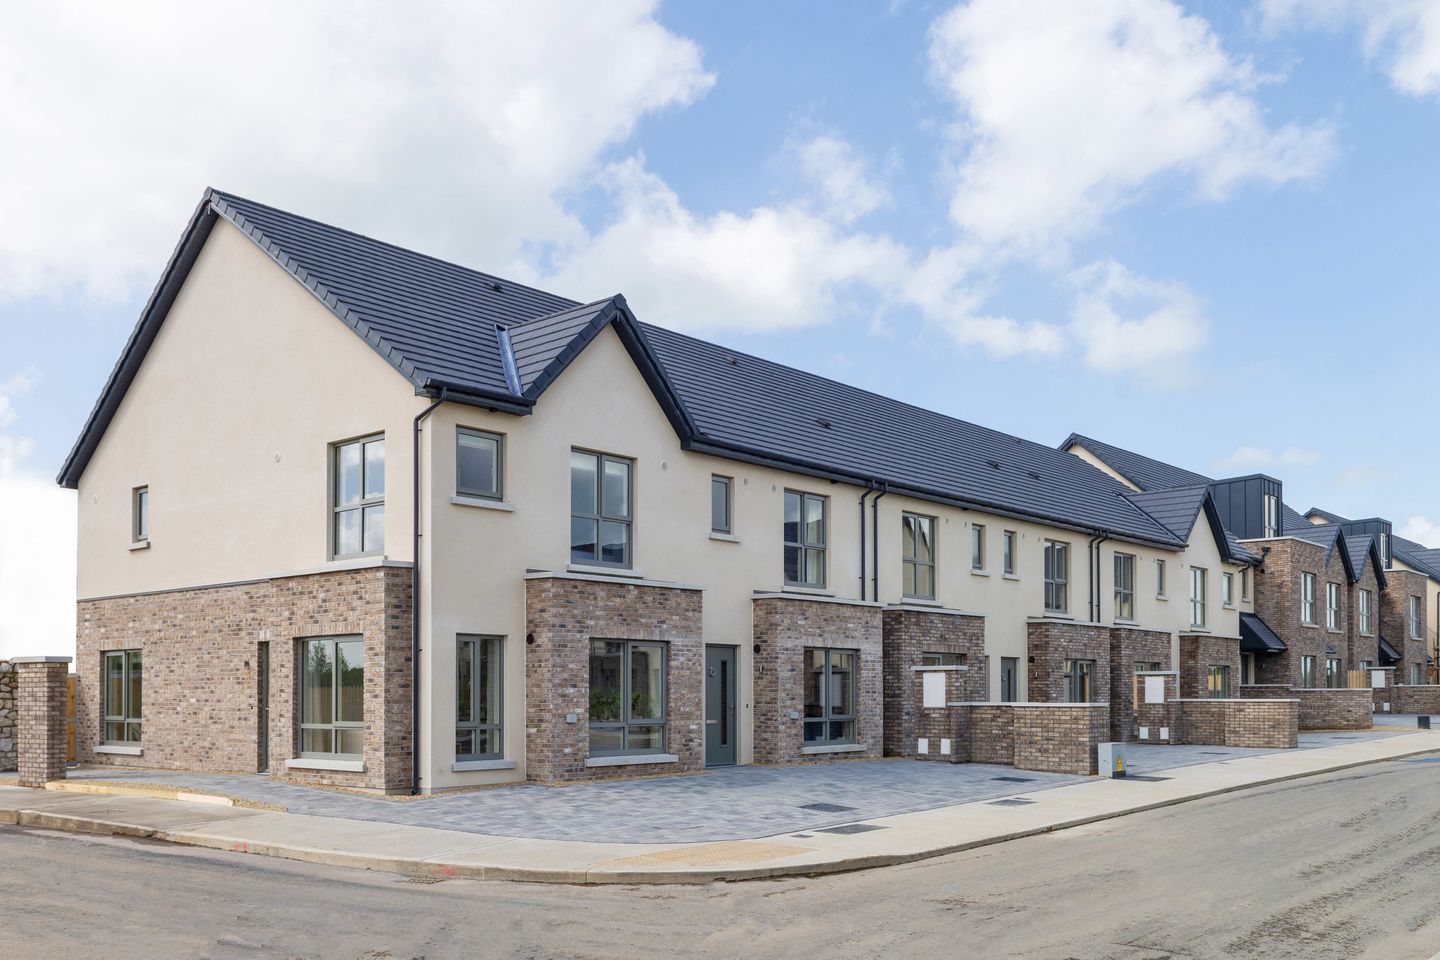 3 Bedroom End Of Terrace - A , The Bawnogues, The Bawnogues, Kilcock, Co. Kildare